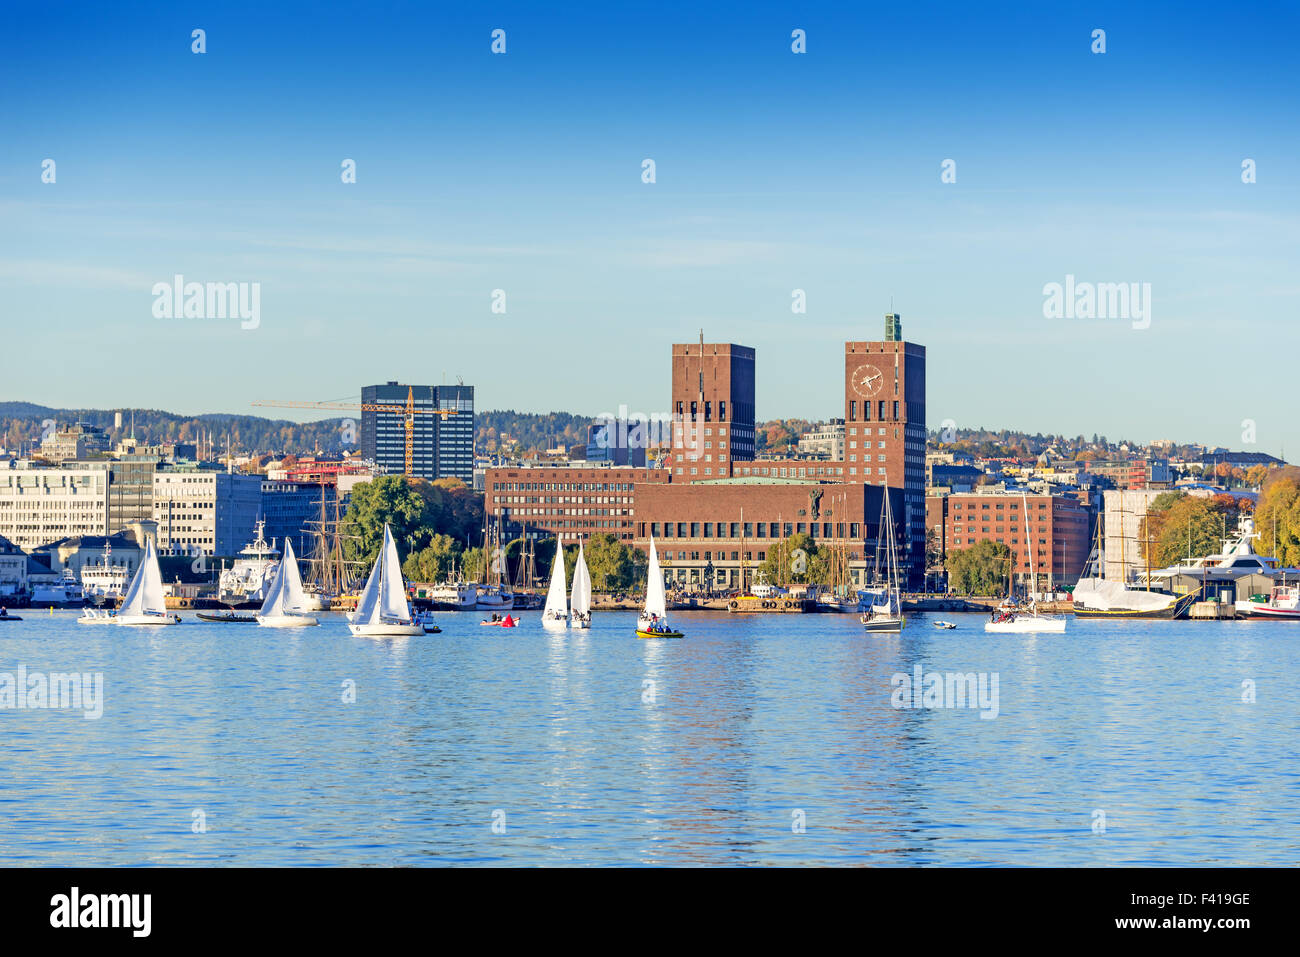 Harbour with boats and wooden yacht Stock Photo